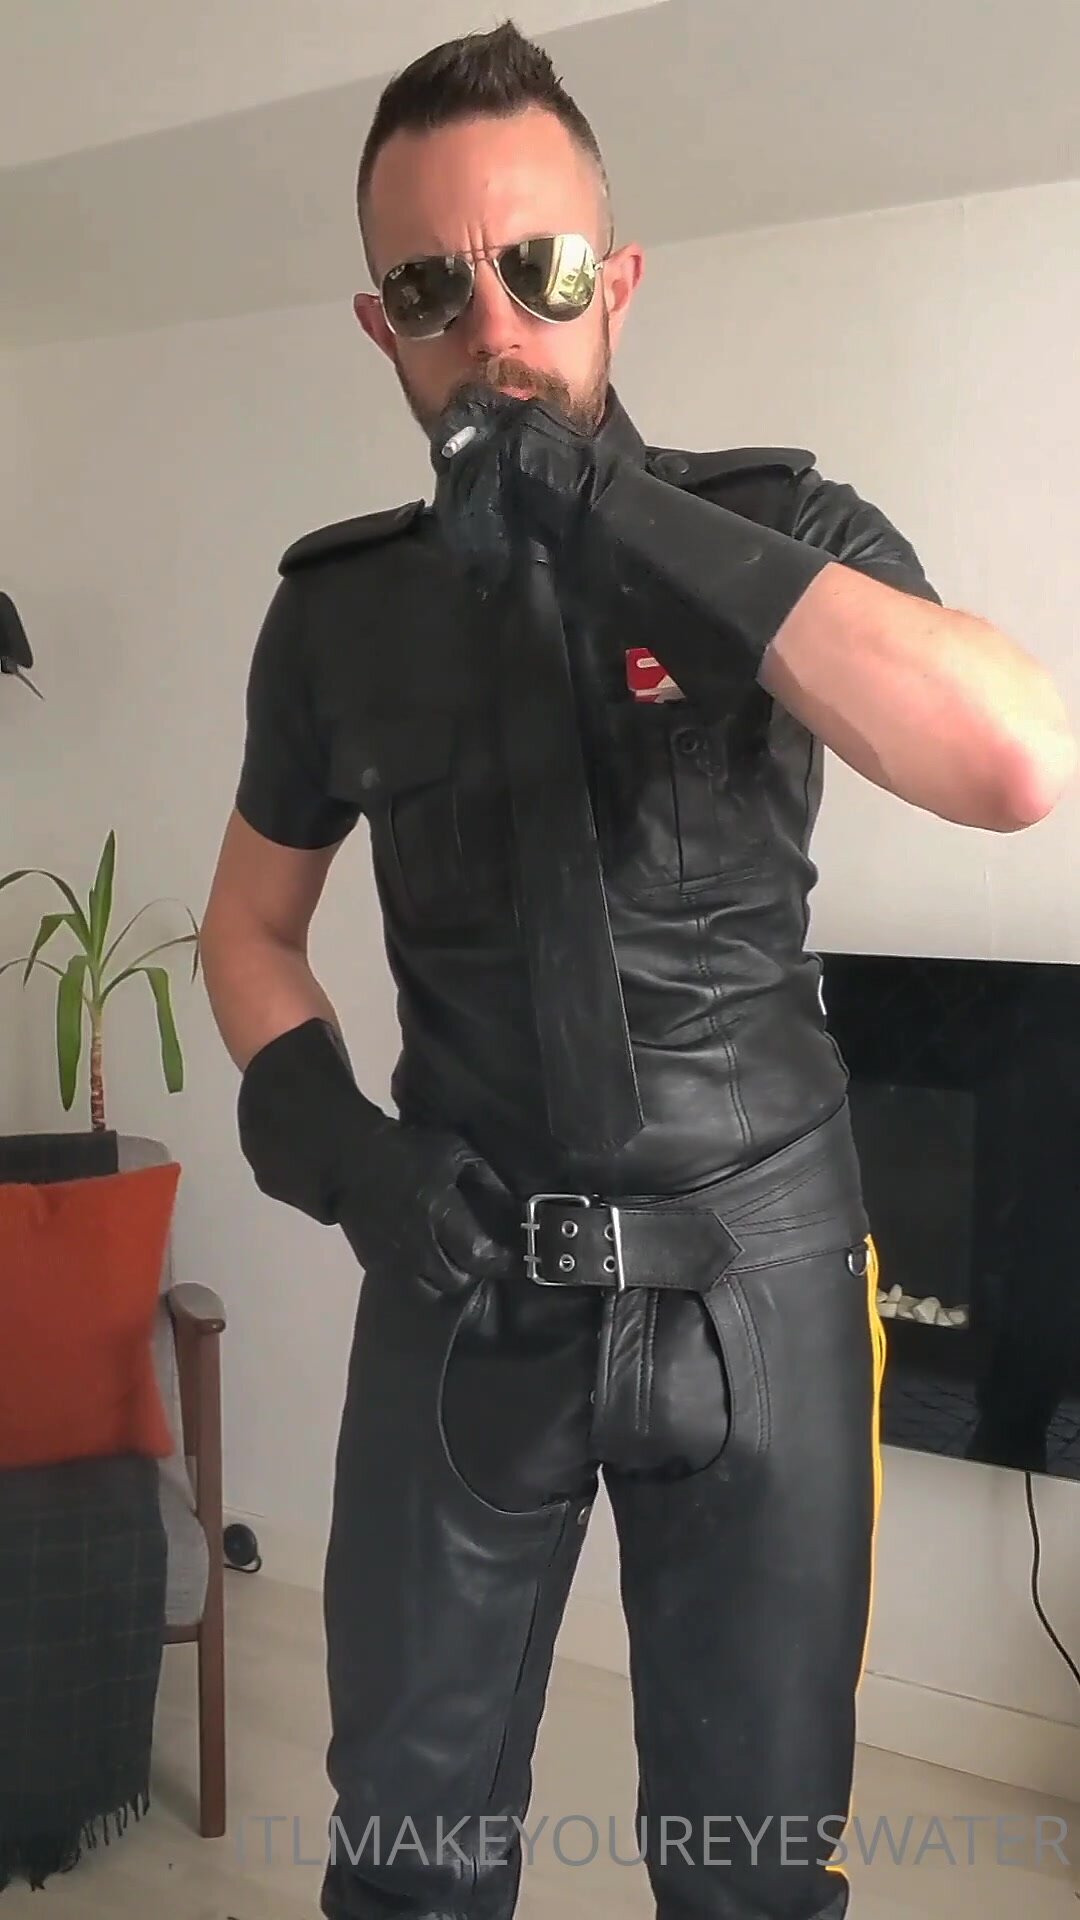 the gloves stay on and the cock comes out